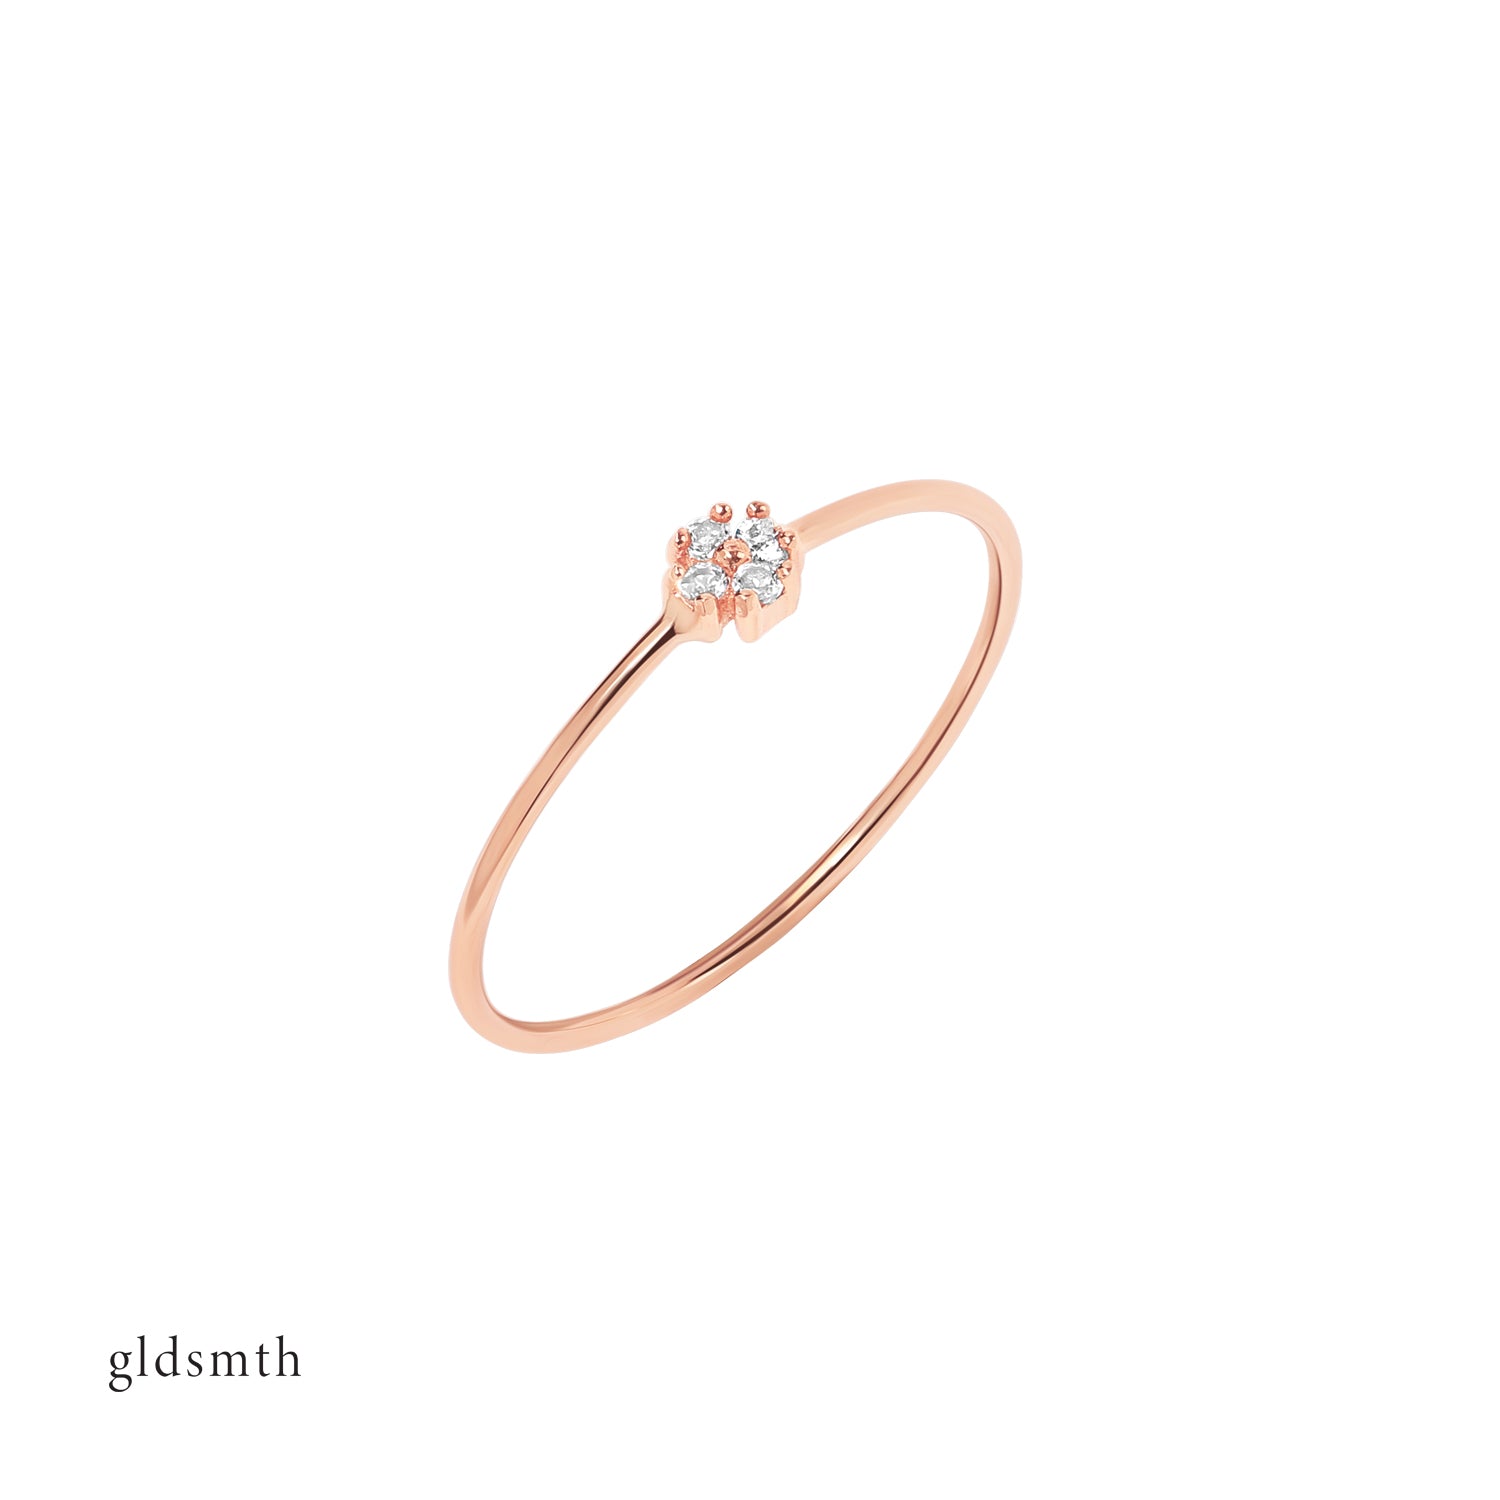 Elegant and fine ring. Handcrafted 14k solid rose gold ring with white topazes. 